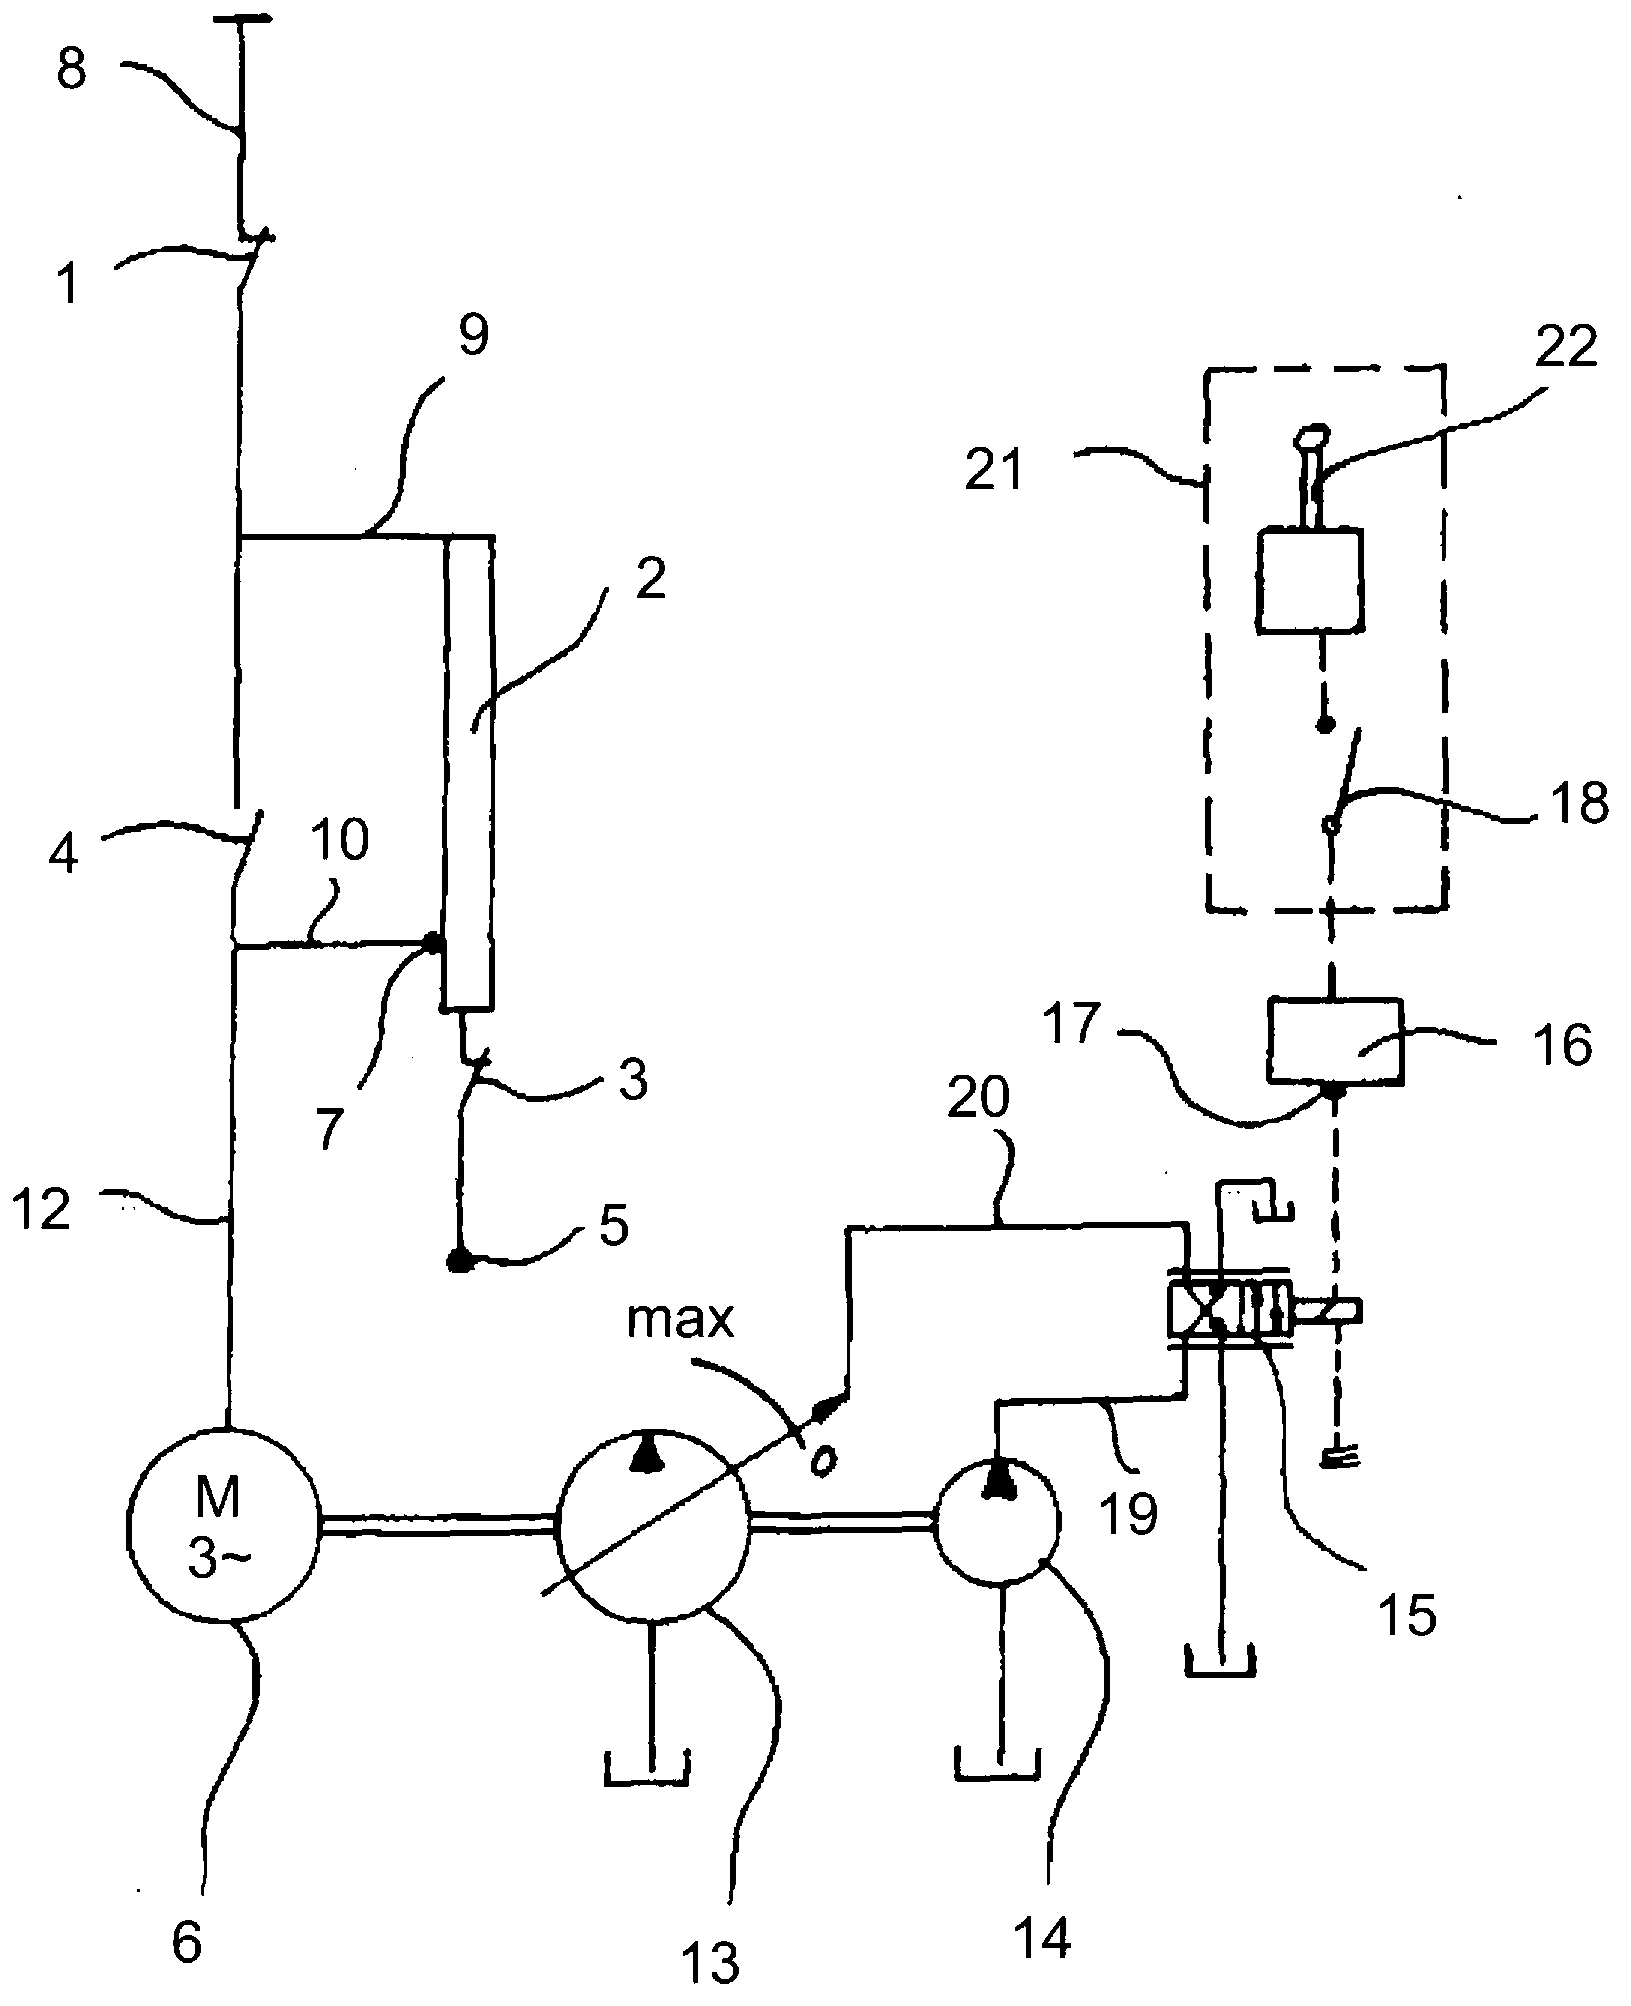 Method for starting an electric motor in a hydraulically operated working machine